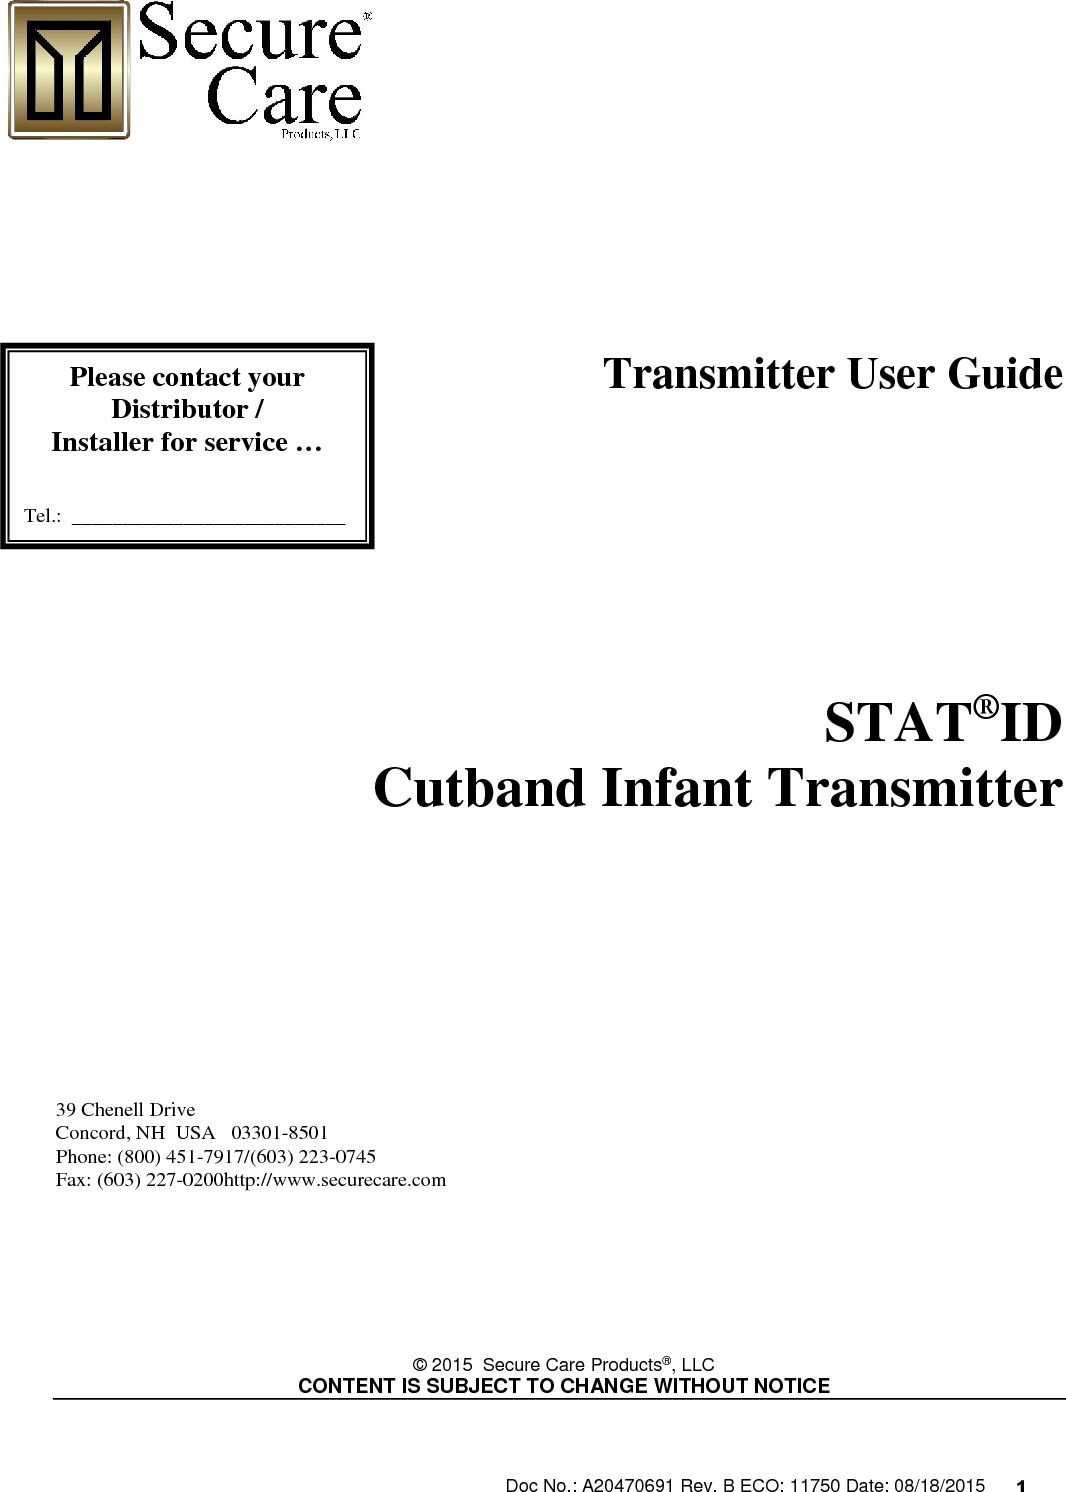 Doc No.: A20470691 Rev. B ECO: 11750 Date: 08/18/2015      1                                                                                        Transmitter User Guide                    STAT®ID   Cutband Infant Transmitter             39 Chenell Drive           Concord, NH  USA   03301-8501            Phone: (800) 451-7917/(603) 223-0745 Fax: (603) 227-0200http://www.securecare.com        © 2015  Secure Care Products®, LLC  CONTENT IS SUBJECT TO CHANGE WITHOUT NOTICE     Please contact your Distributor / Installer for service …   Tel.:  ___________________________  